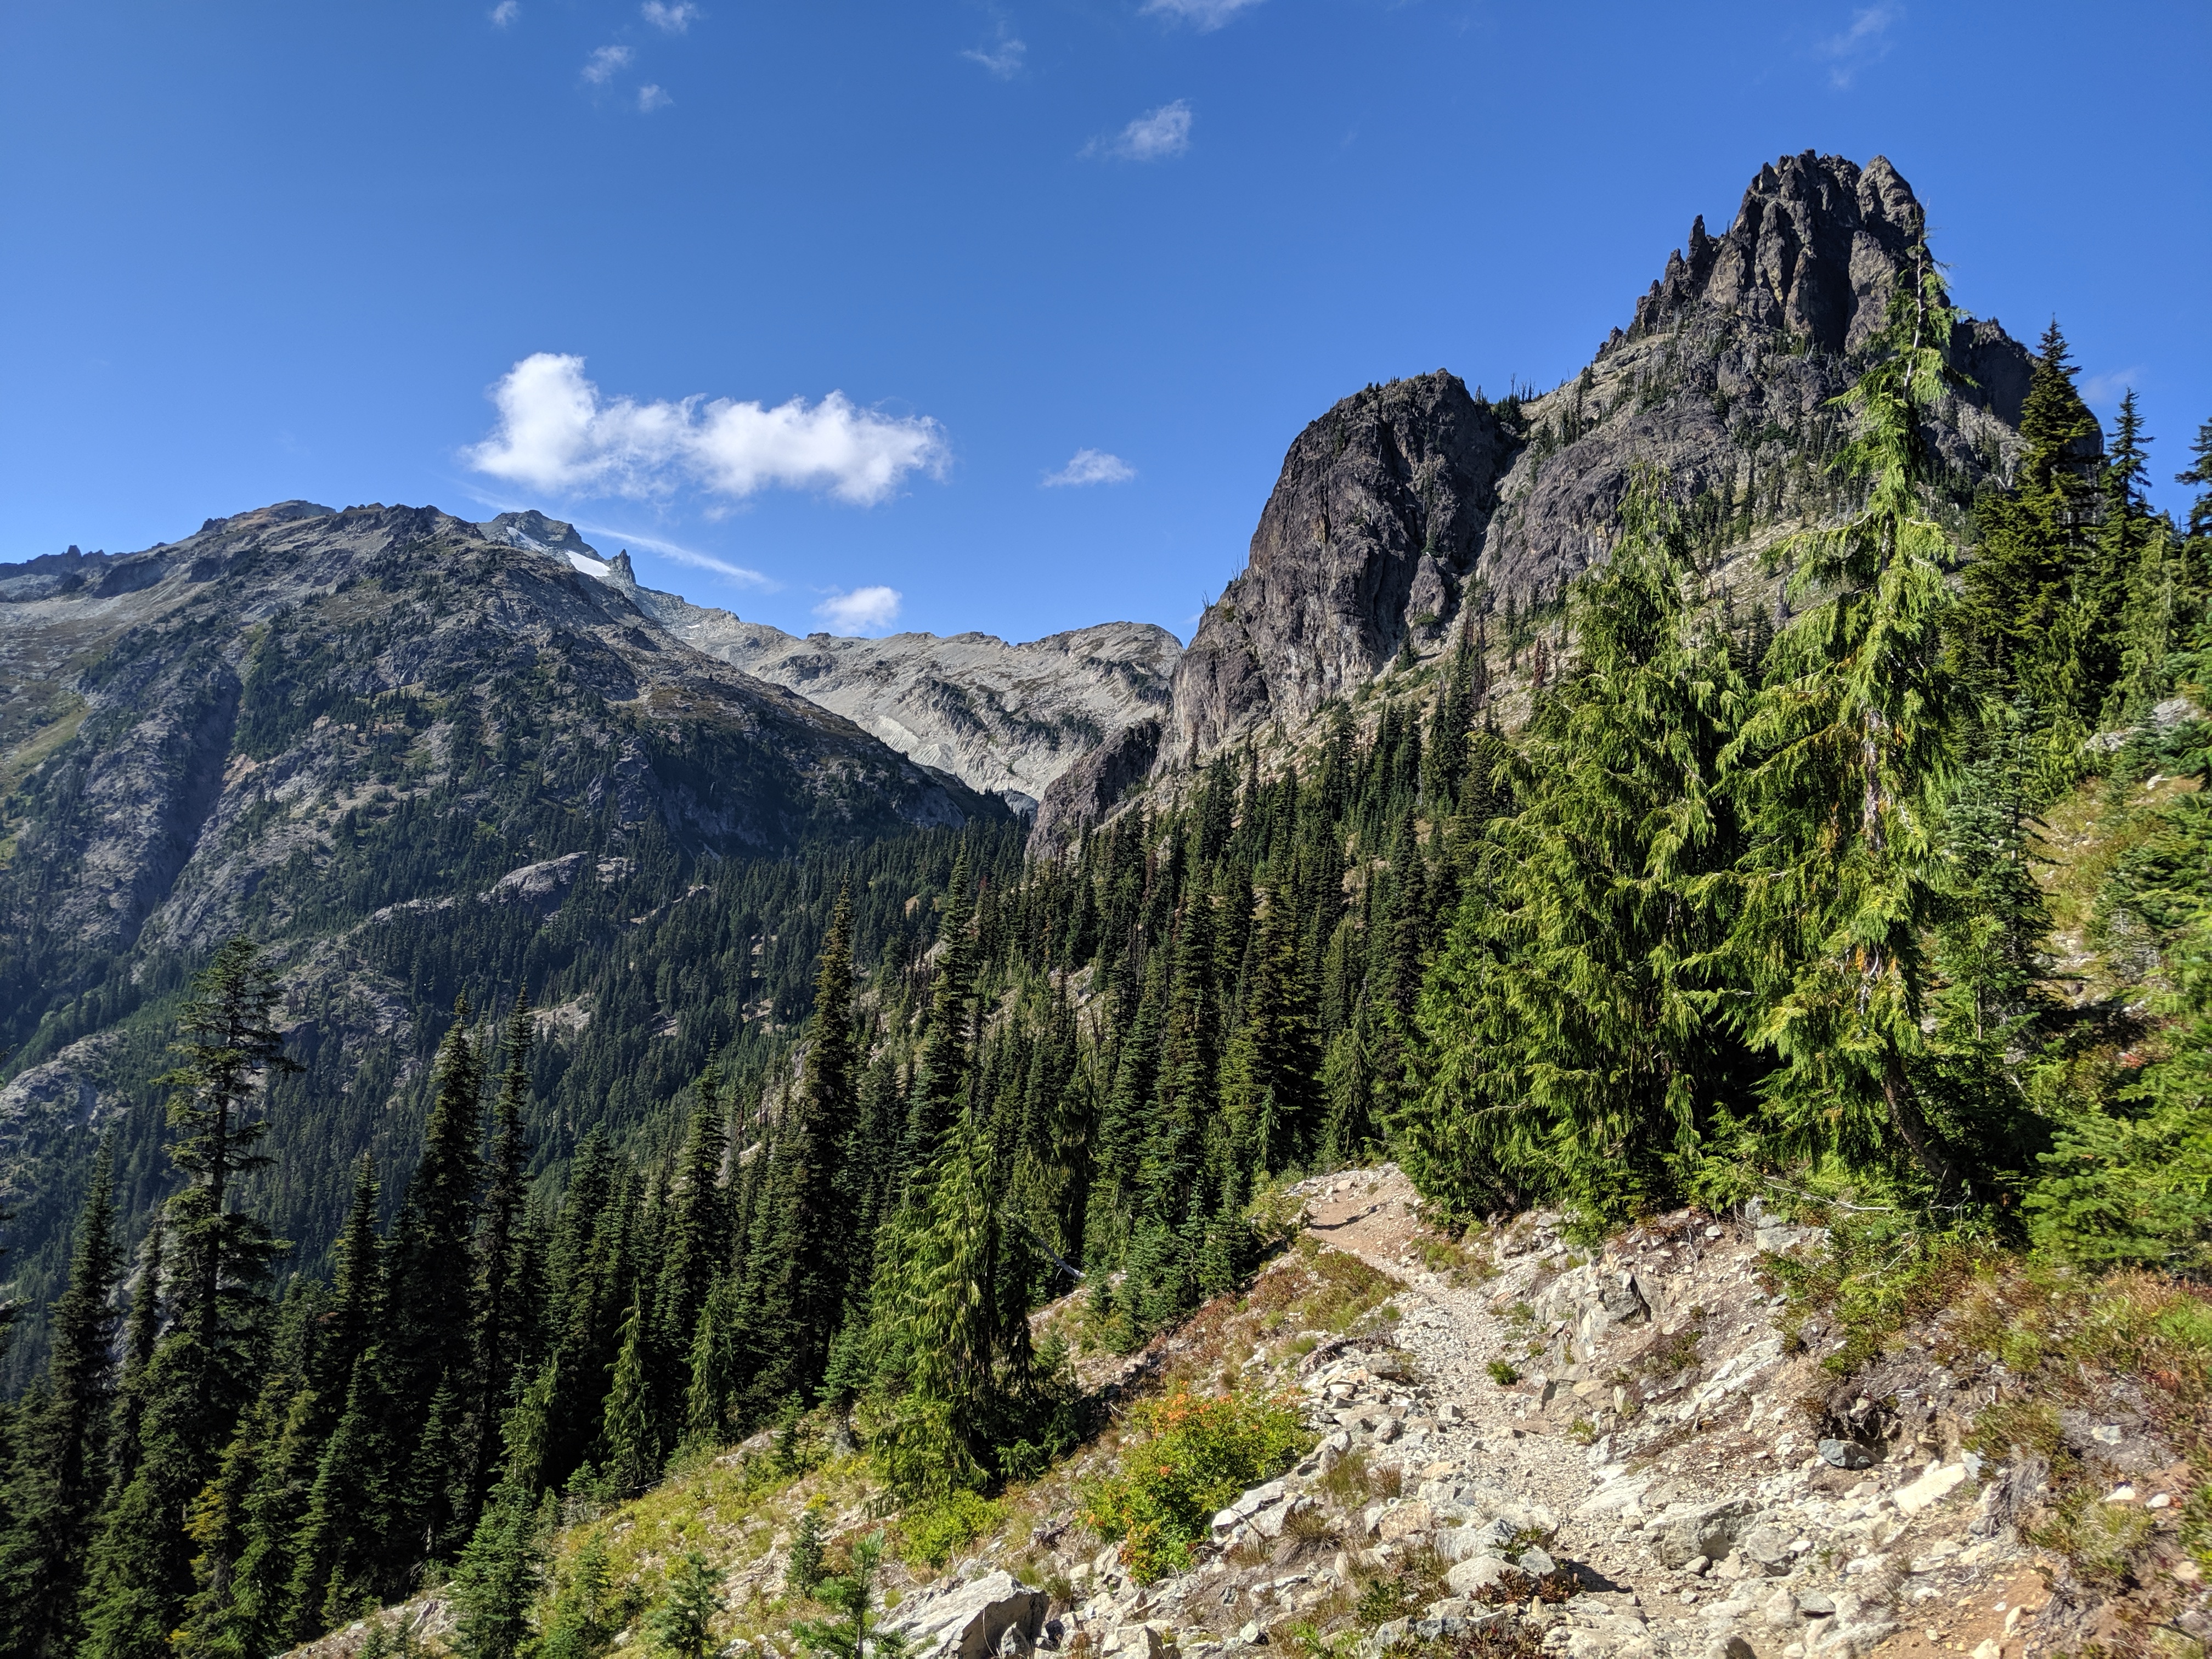 Day 112: More Alpine Lakes Wilderness